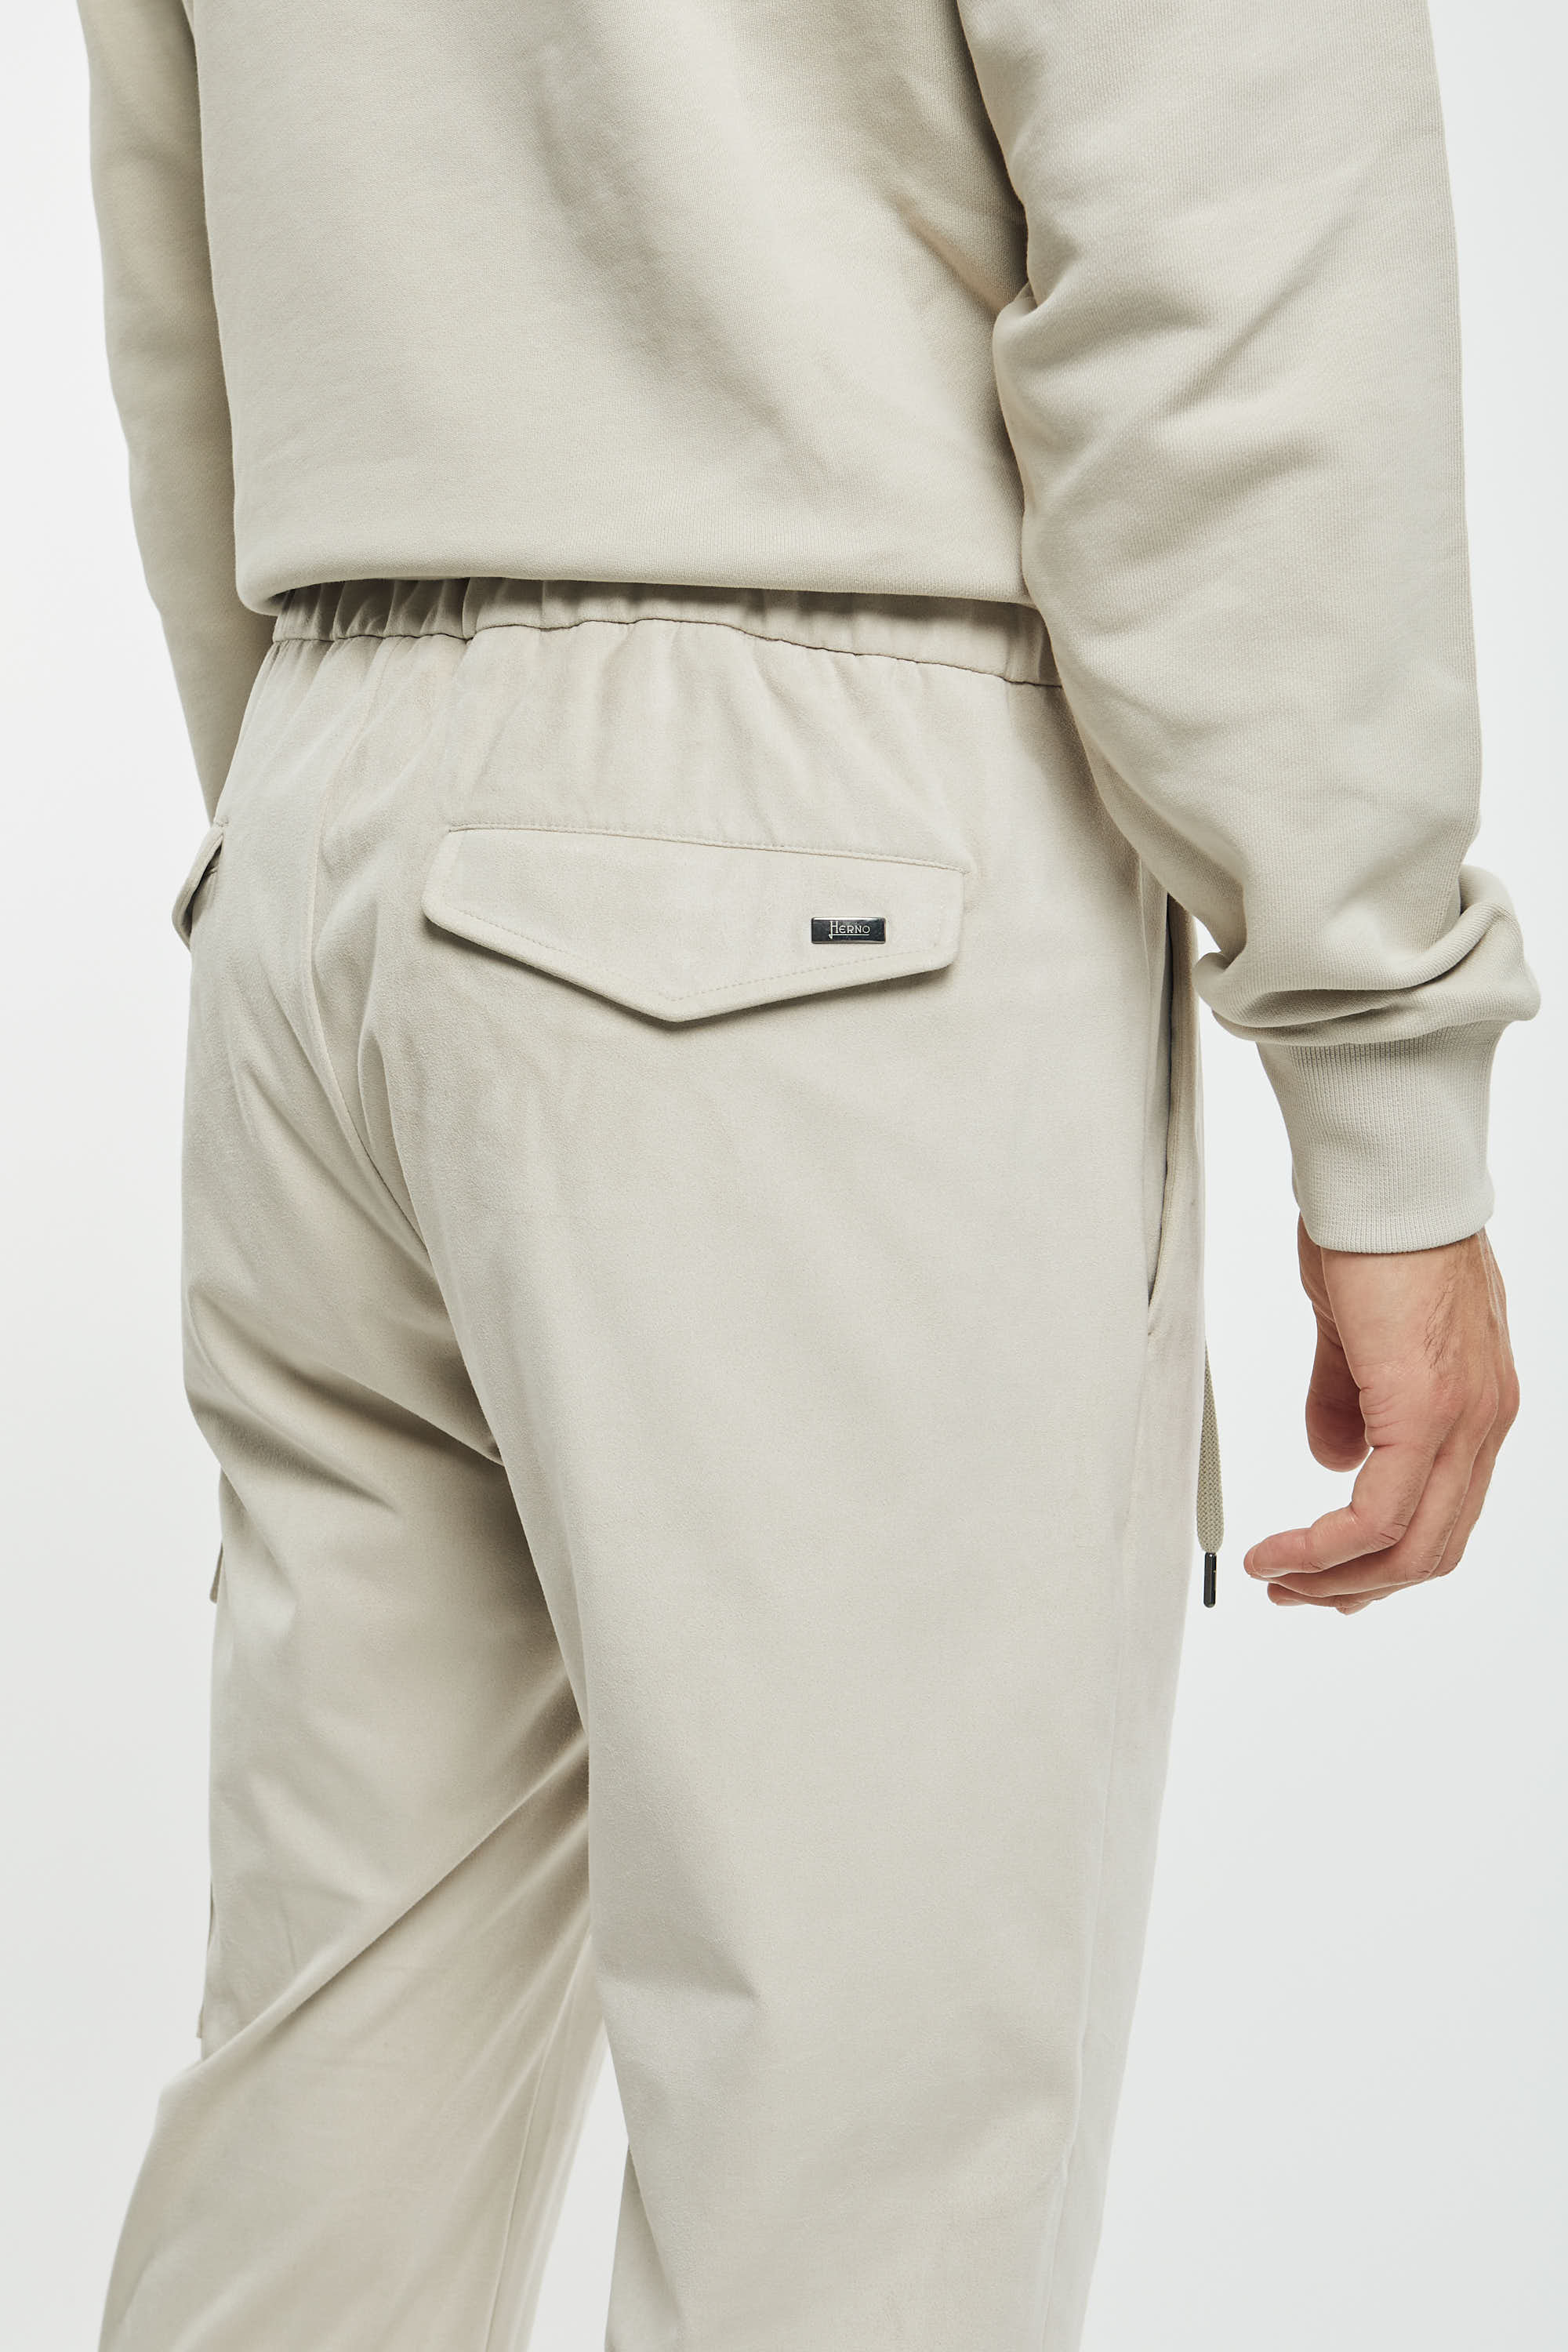 Herno Resort Trousers in Suede Microfiber Ice-2